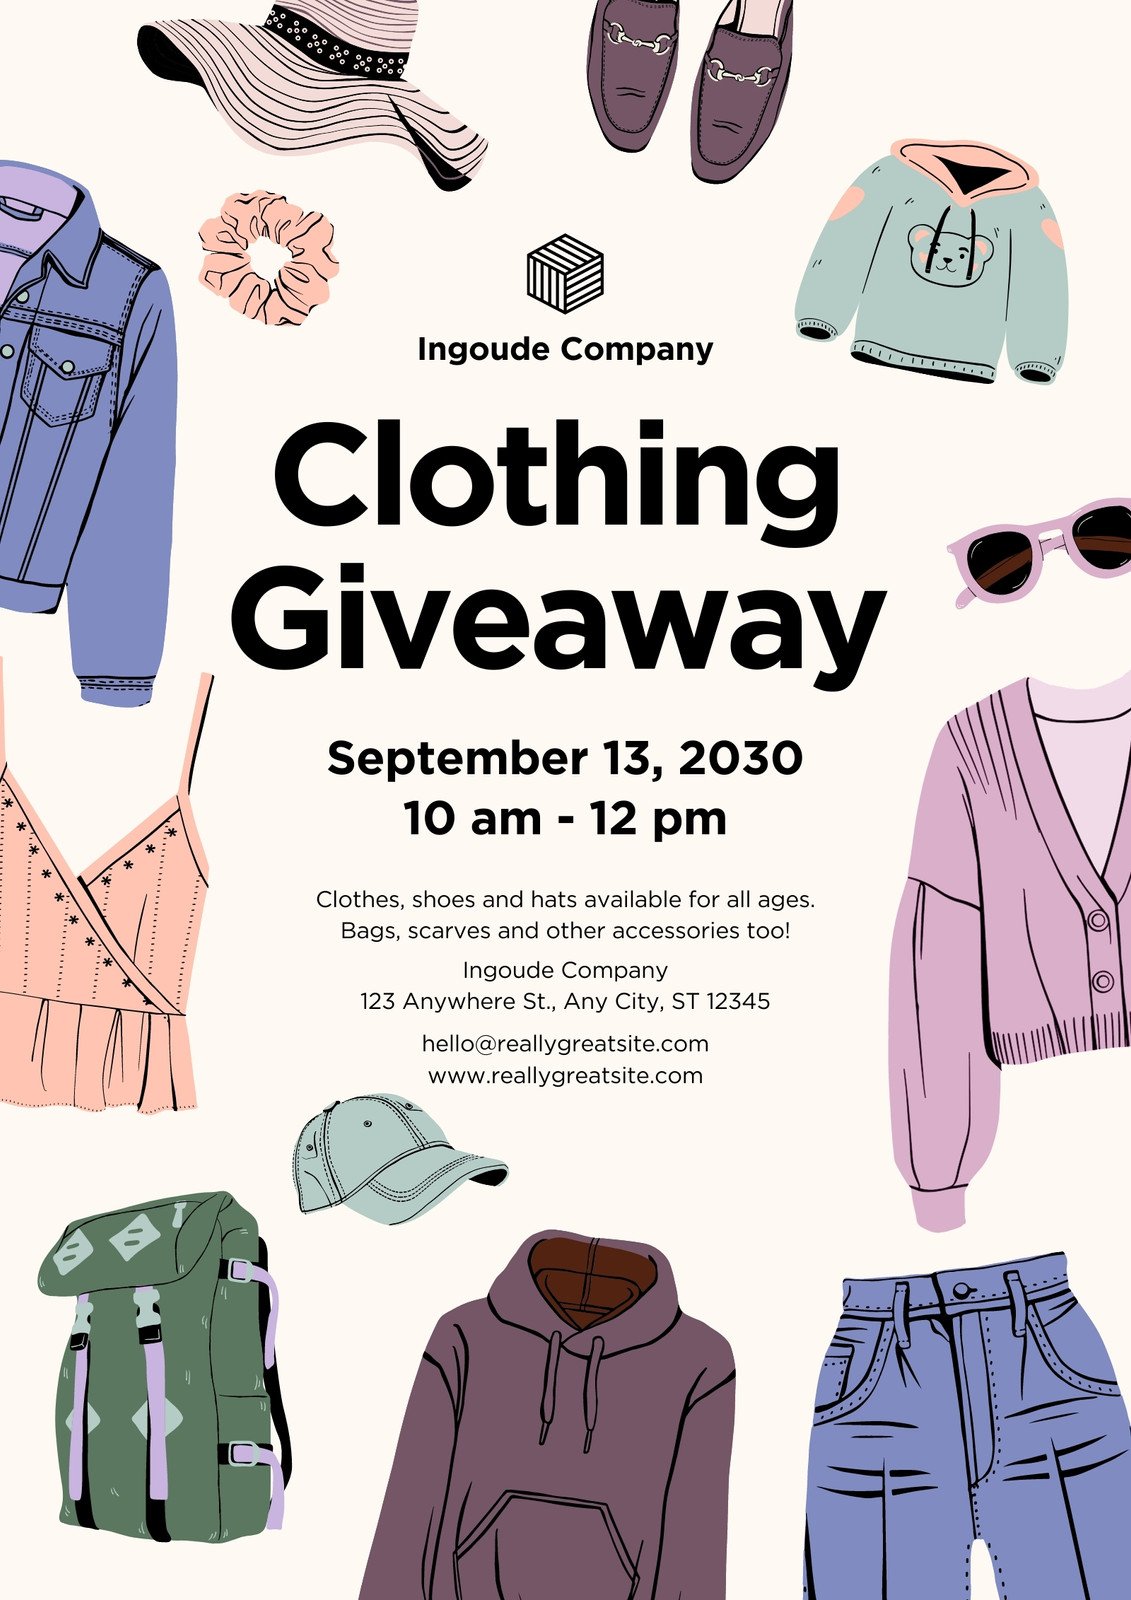 Clothing sample giveaways by mail